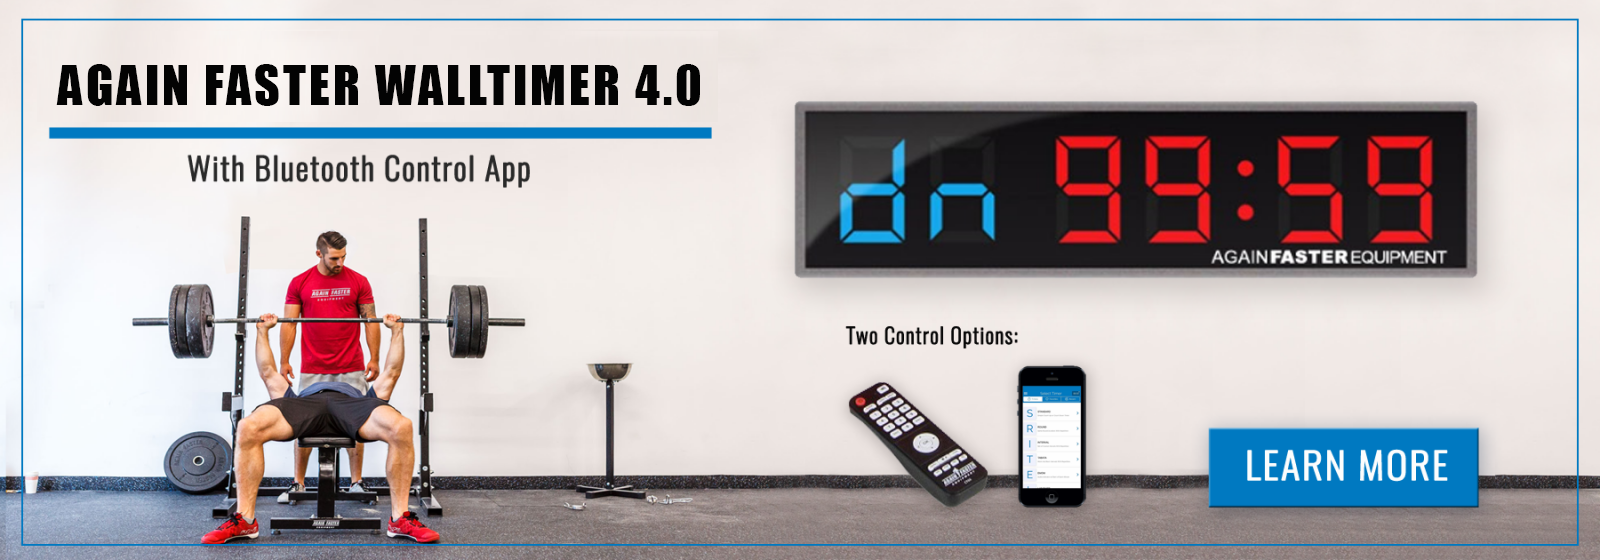 NEW Again Faster Wall Timer 4.0 banner